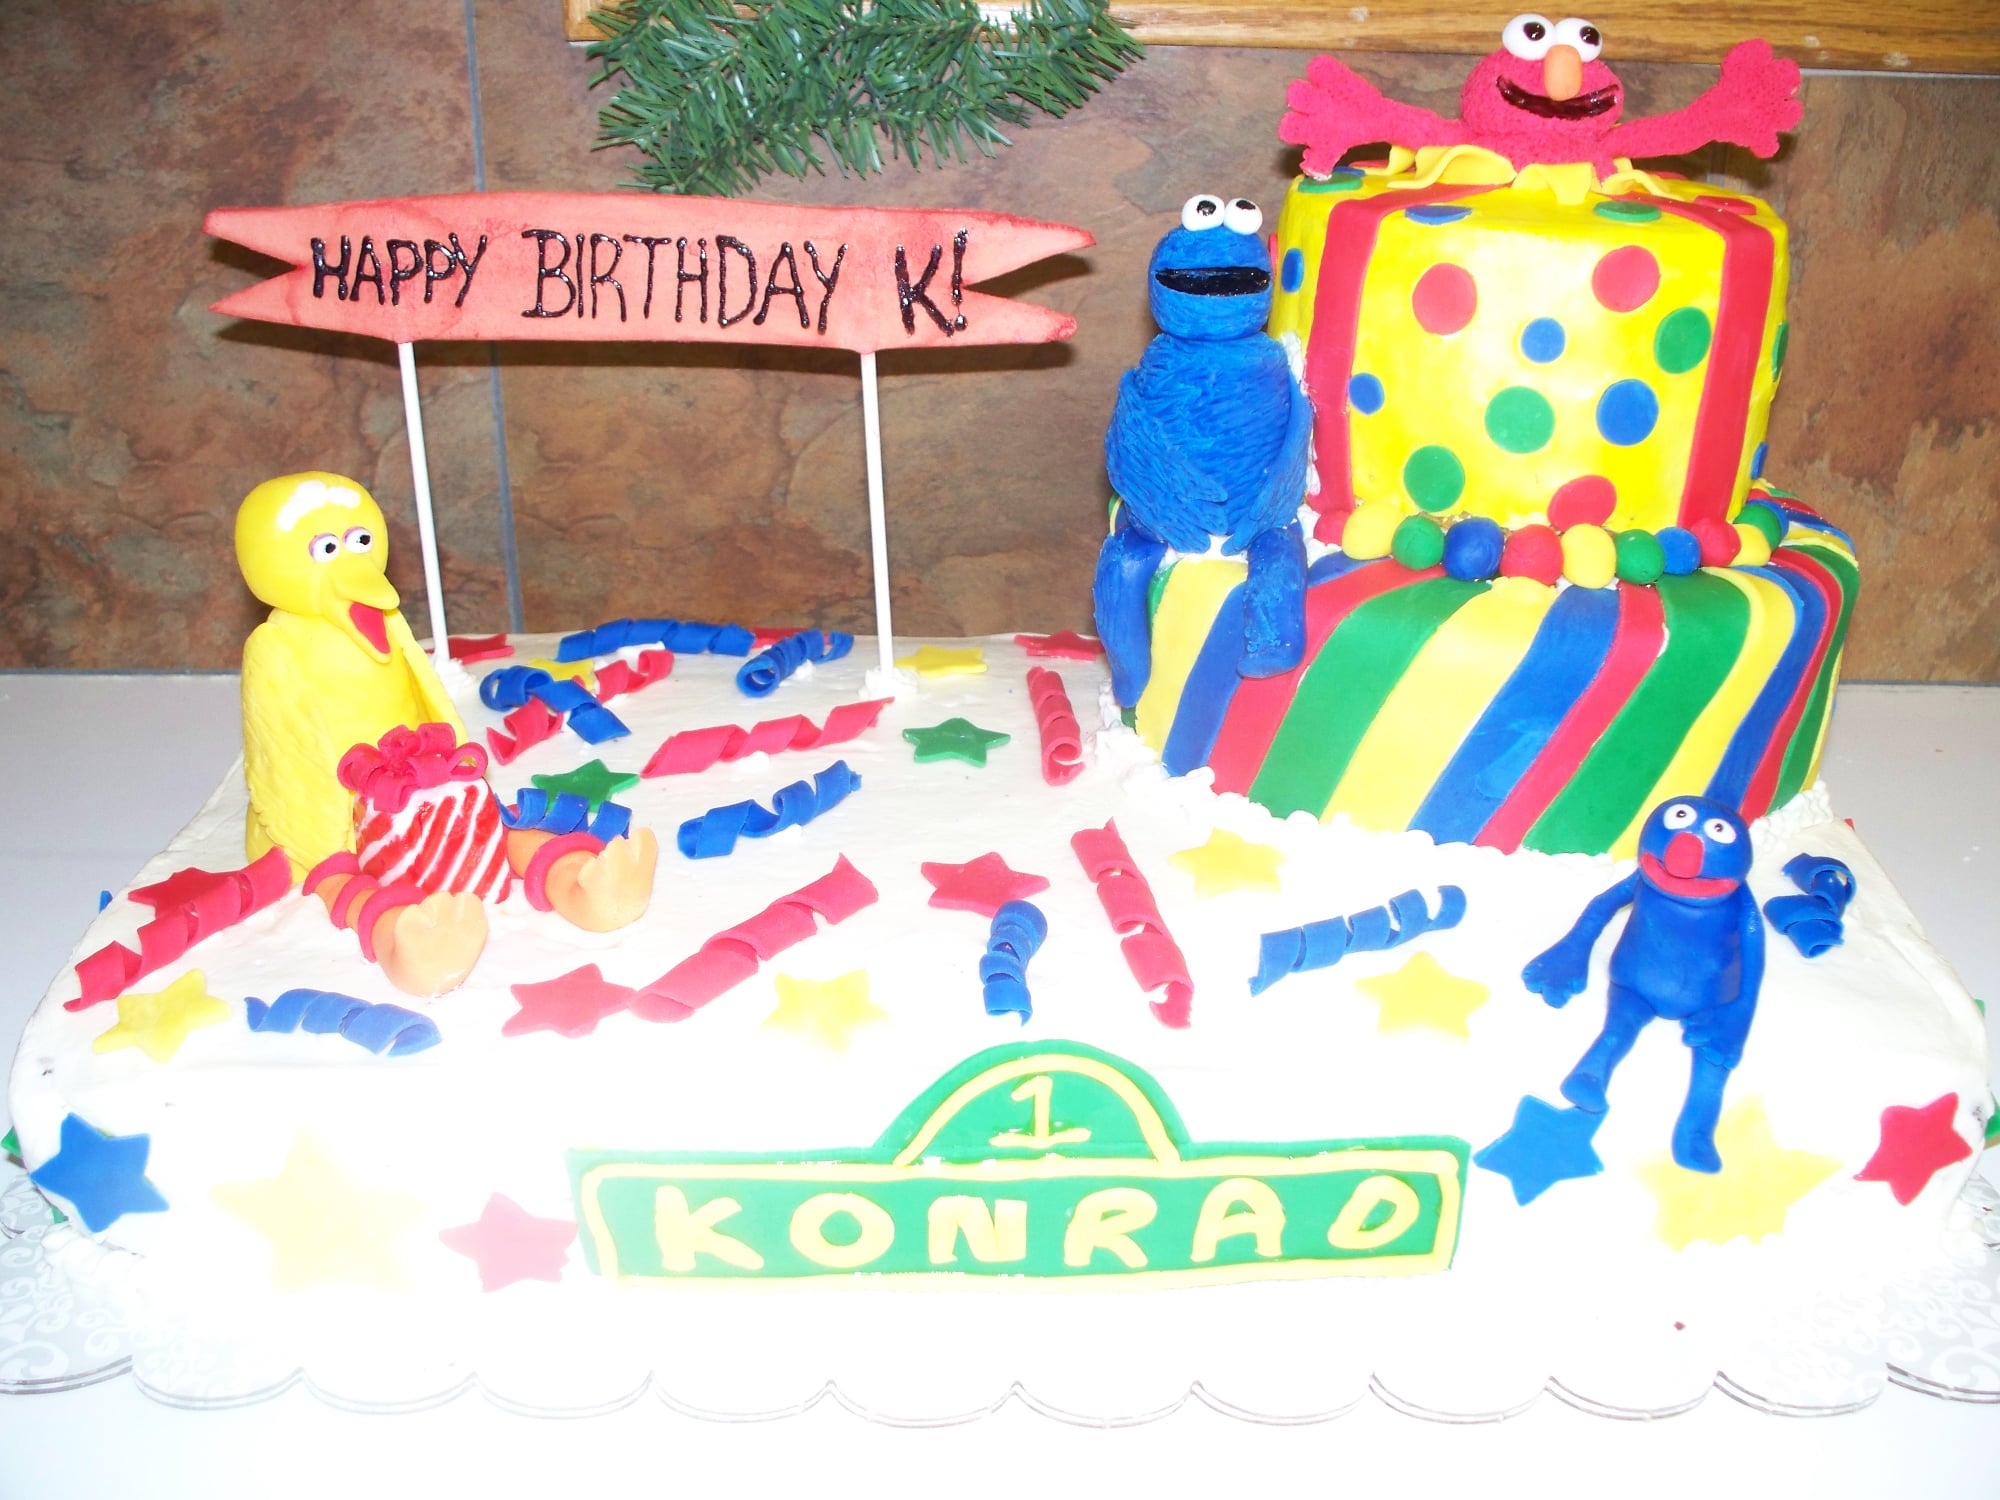 Custom birthday cake with sesame street characters on it. Made by Nan's Nummies